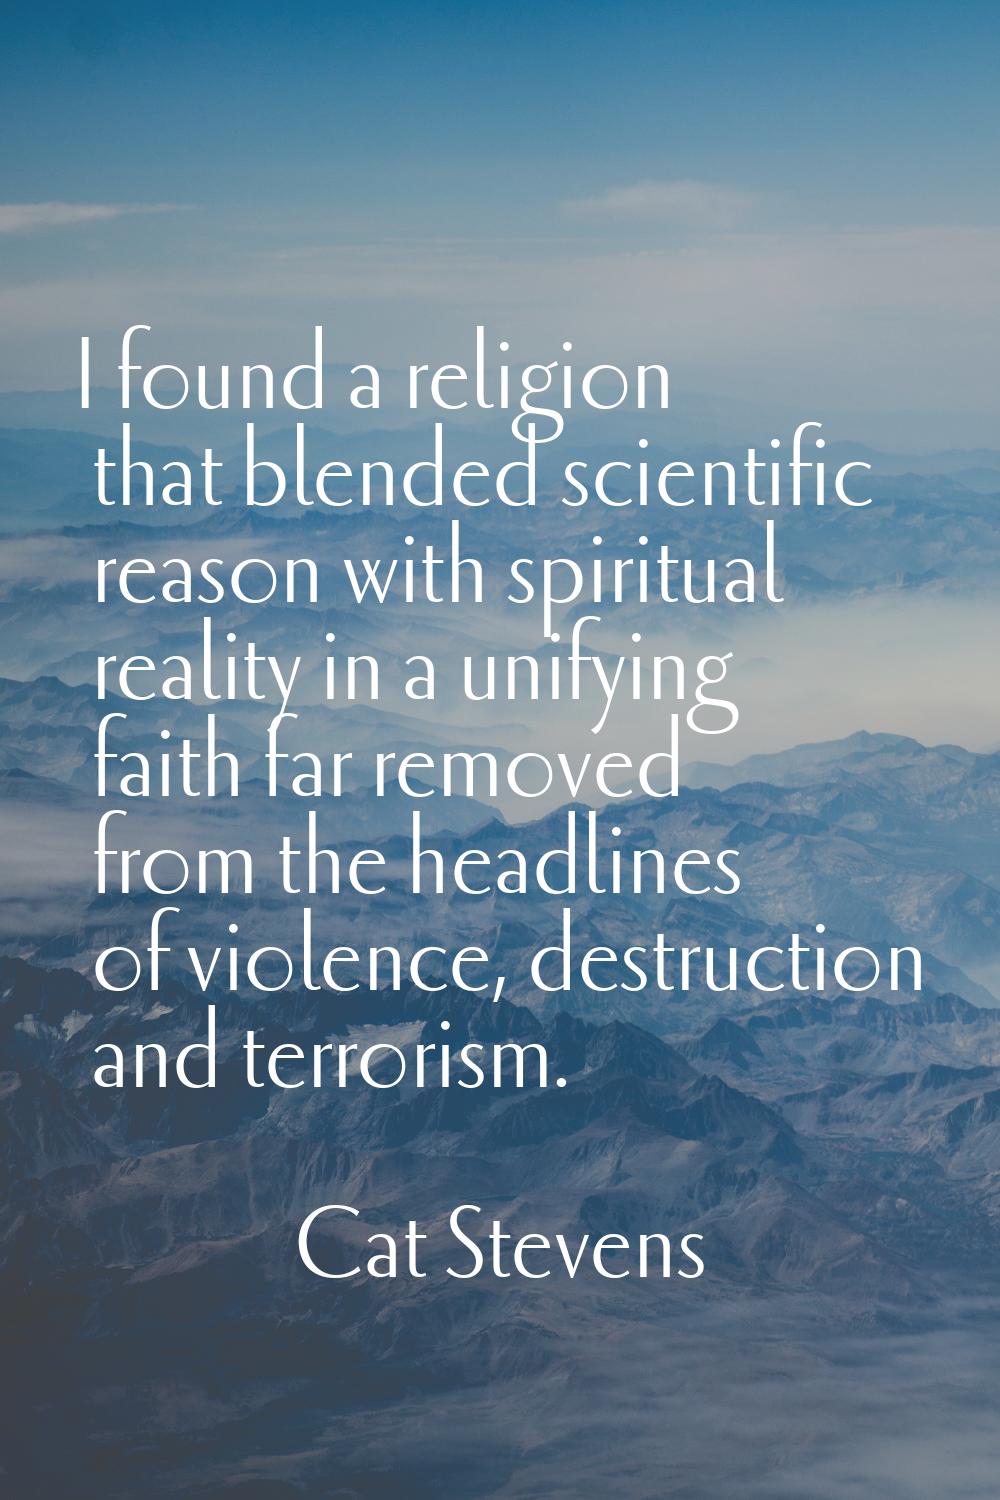 I found a religion that blended scientific reason with spiritual reality in a unifying faith far re